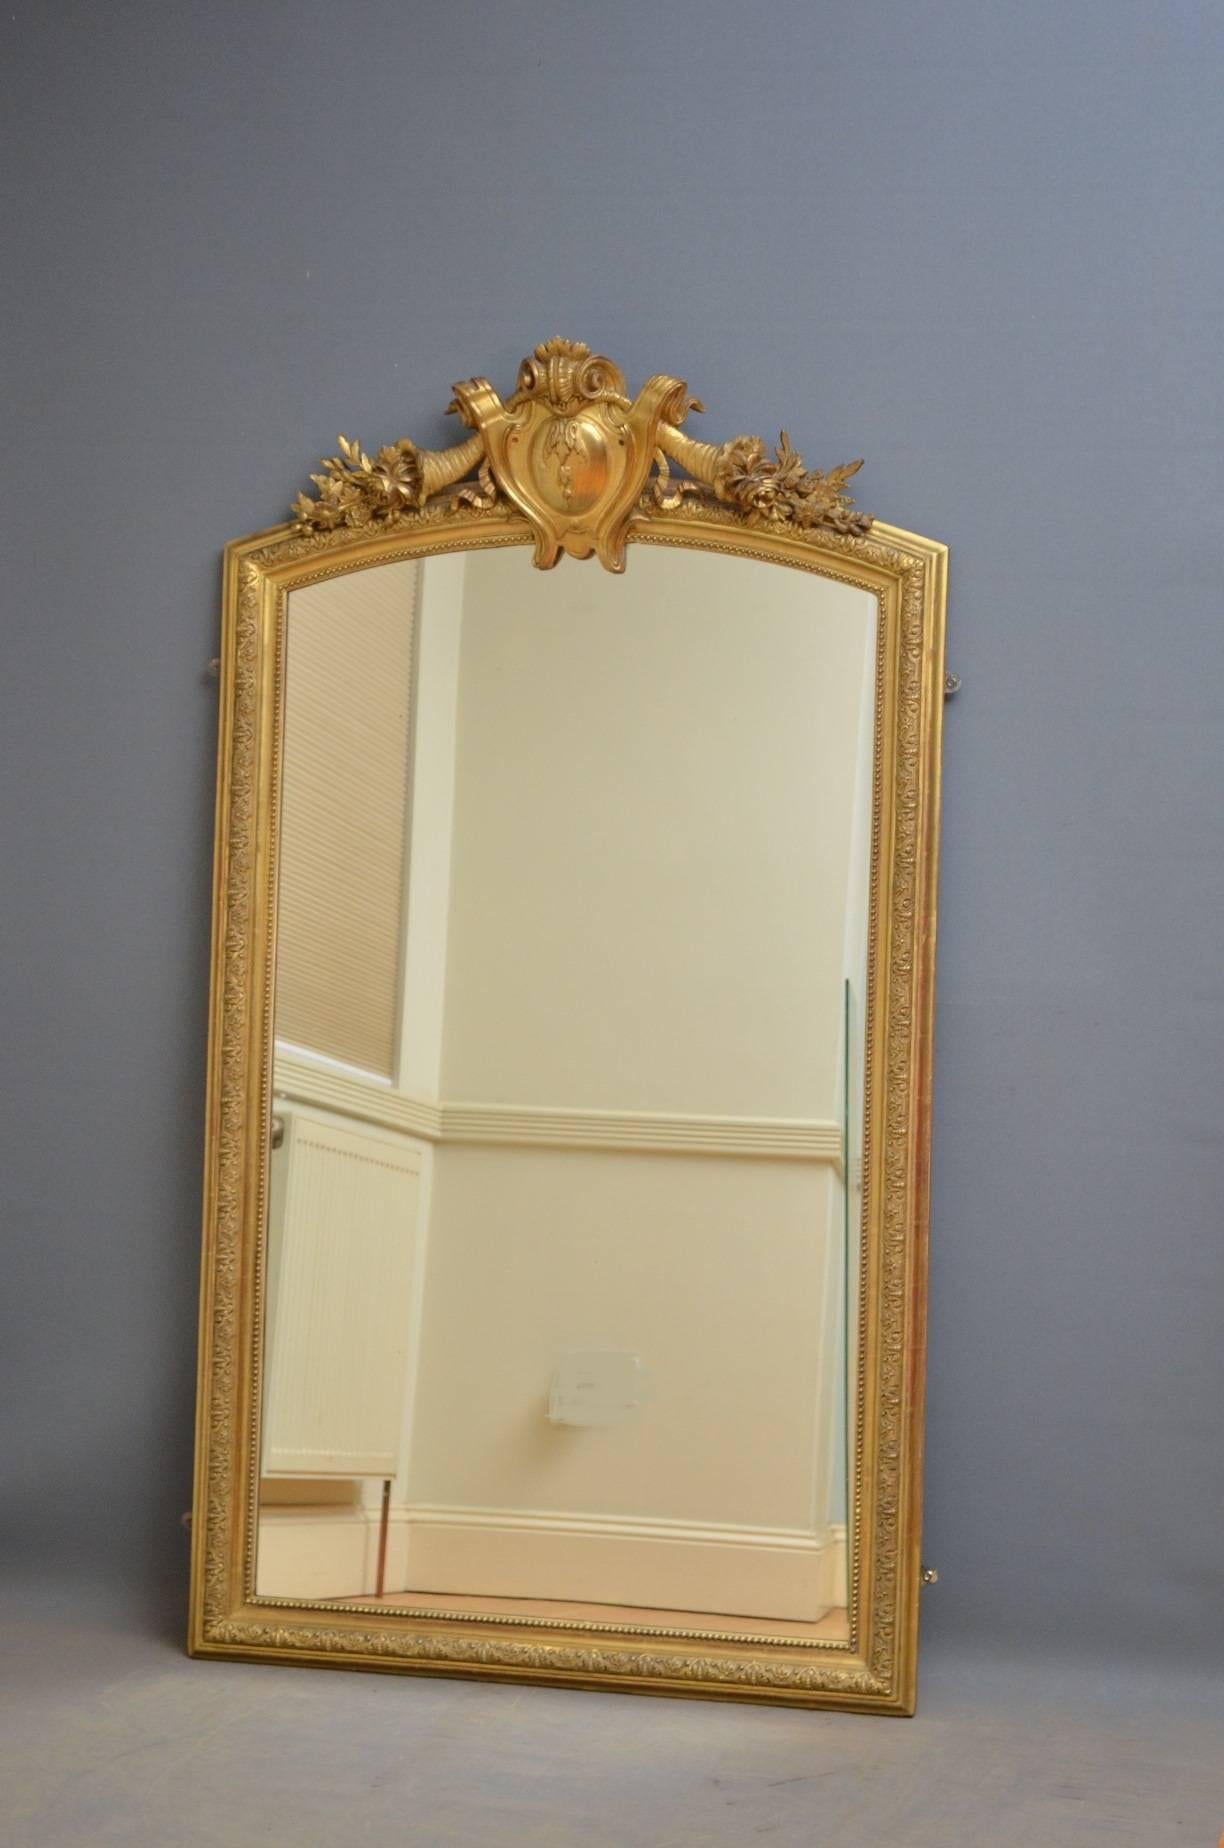 Sn4144 French 19th century giltwood mirror, having large carouche to centre flanked by floral motifs and finely carved frame. This excellent wall mirror retains original gilt throughout, all in wonderful condition, ready to place at home, circa